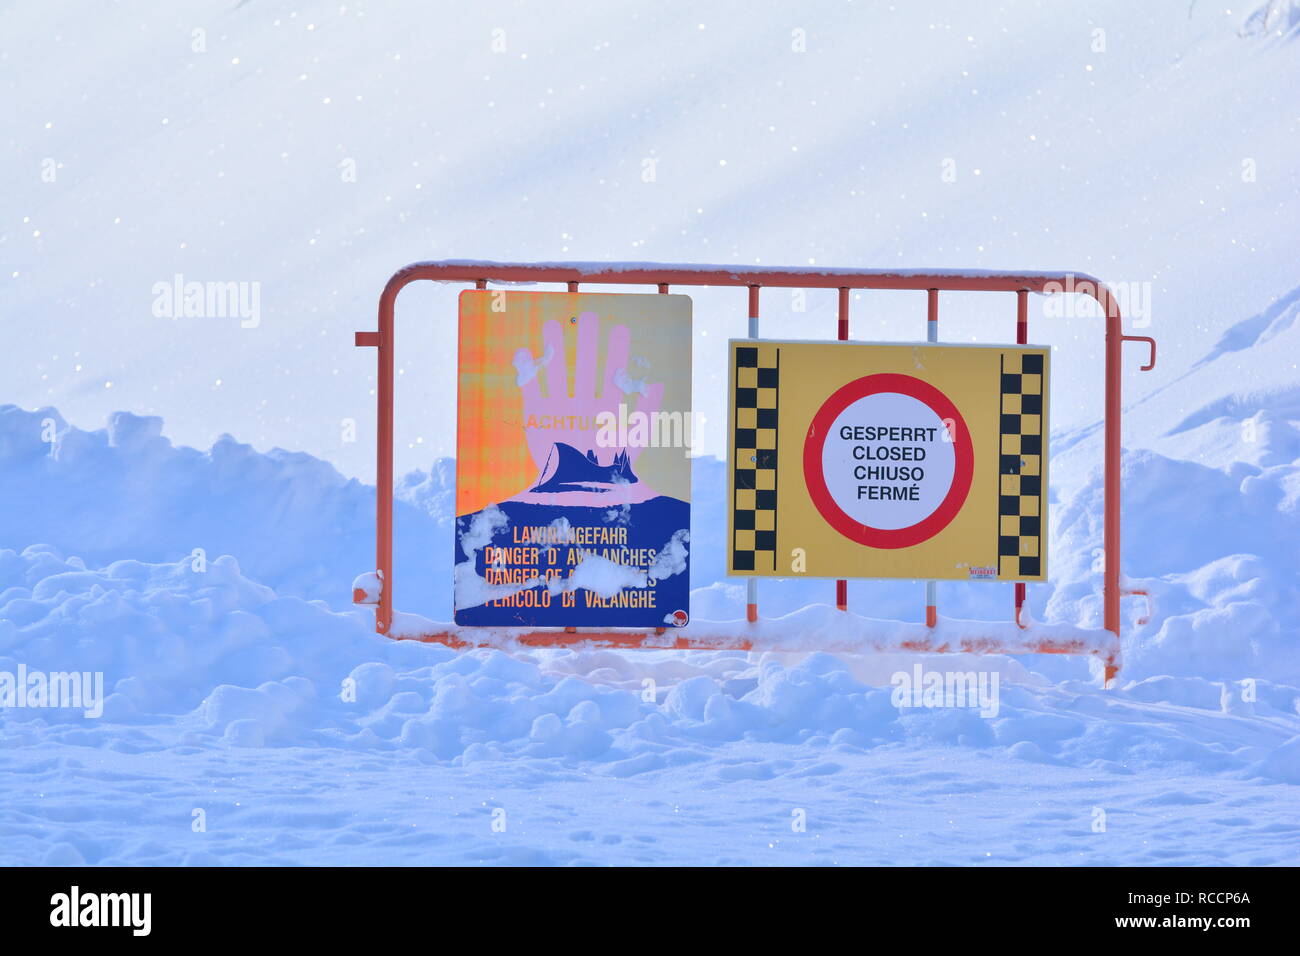 Avalanche danger sign. Closed road due to avalanche danger in the Austrian Alps. Massive snowfall in central Europe. Stock Photo